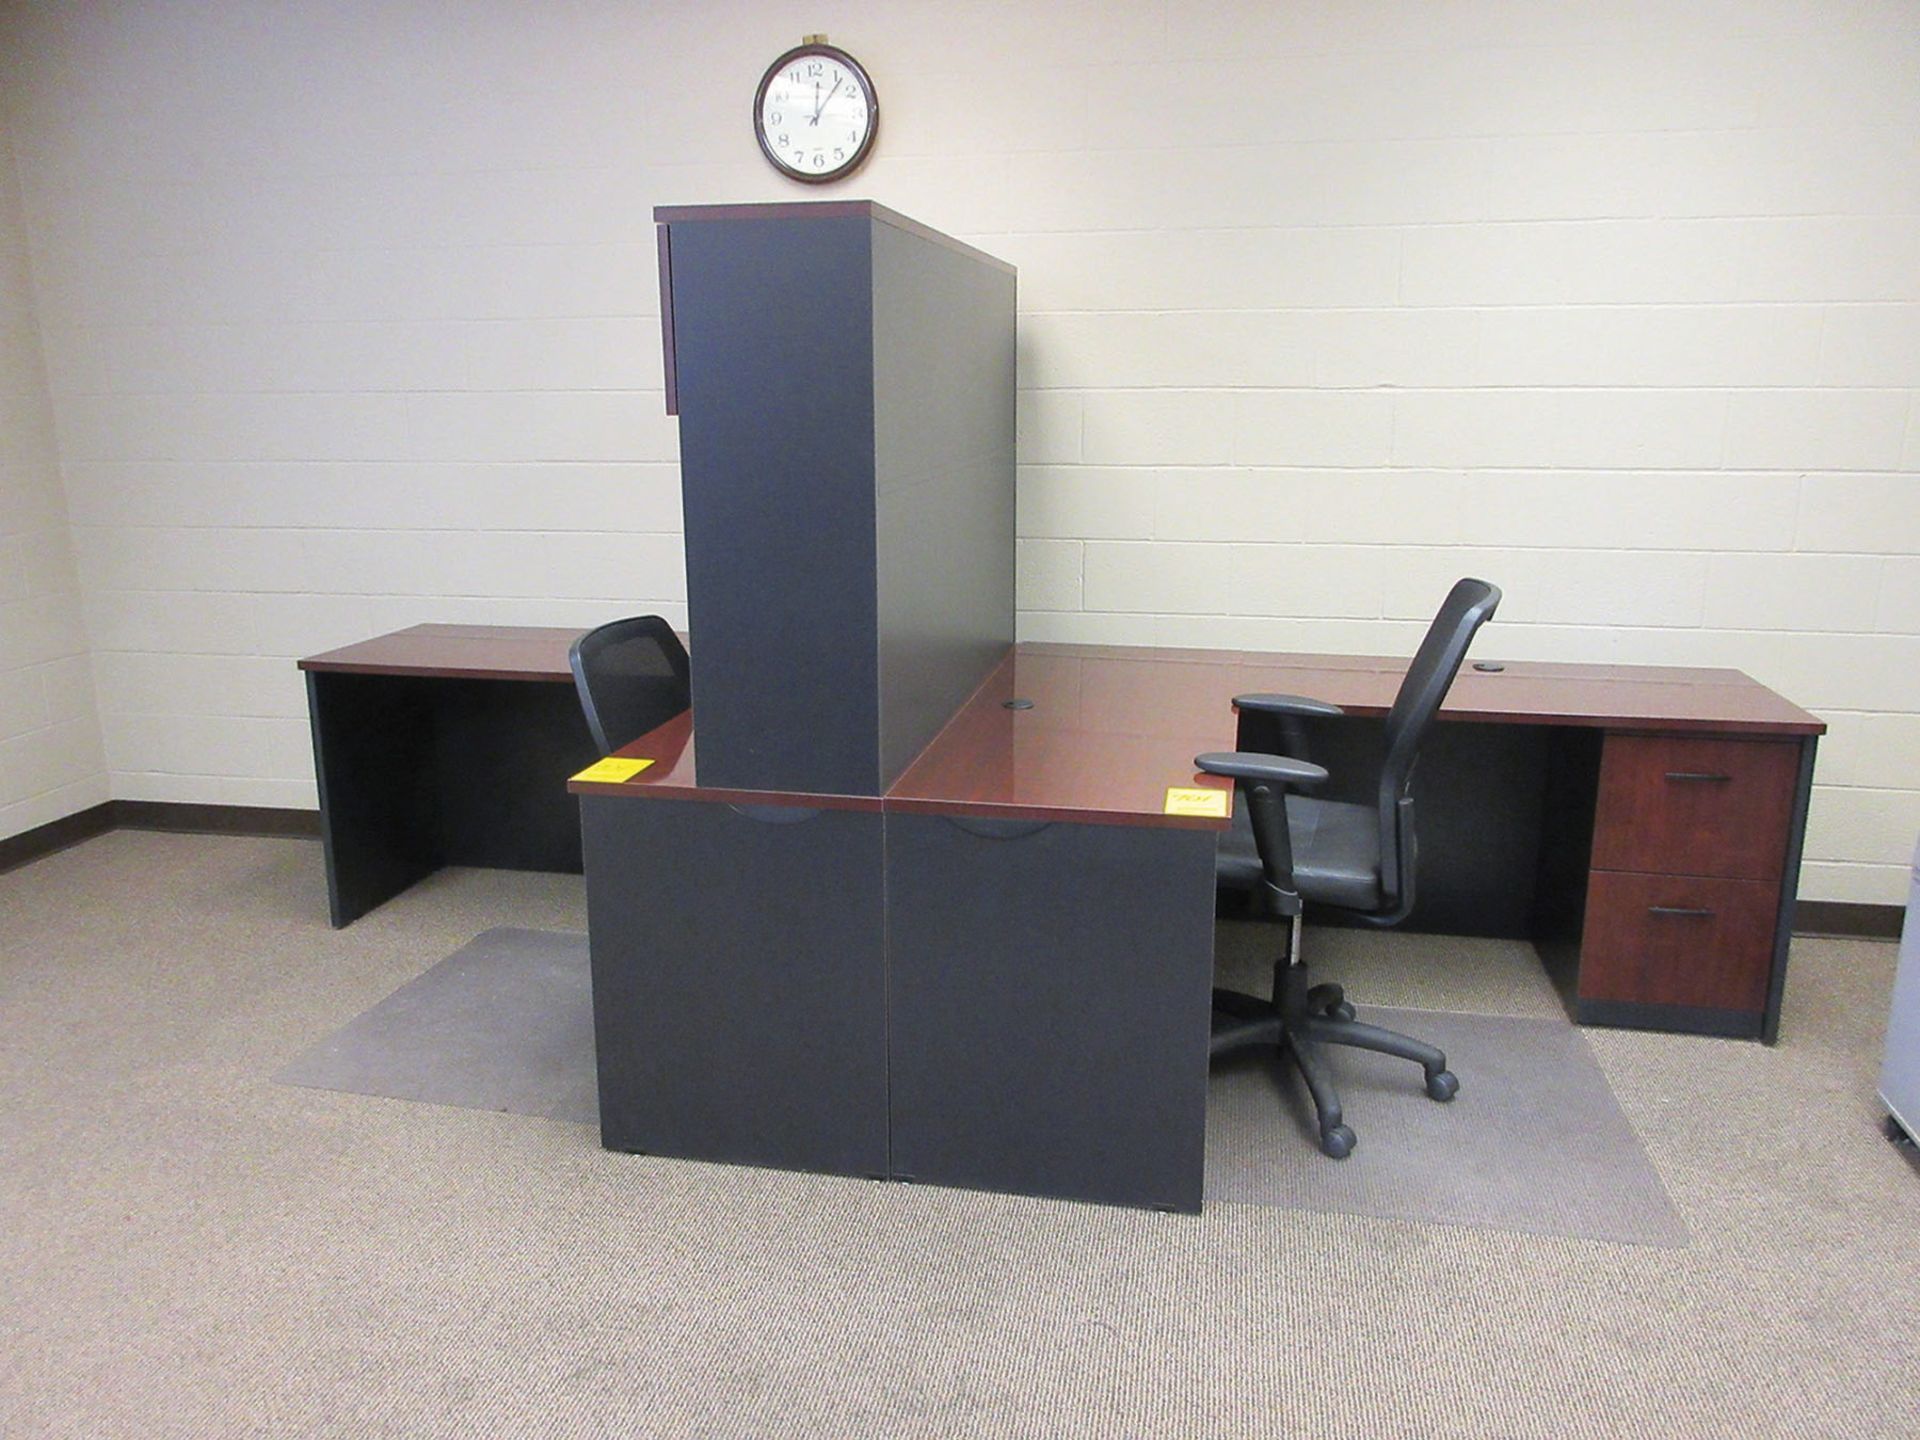 (3) CORNER DESKS, (3) CHAIRS, (1) LATERAL CABINETS, (1) 2-DOOR CABINET, PLANAR MONITOR, AND HP - Image 2 of 4